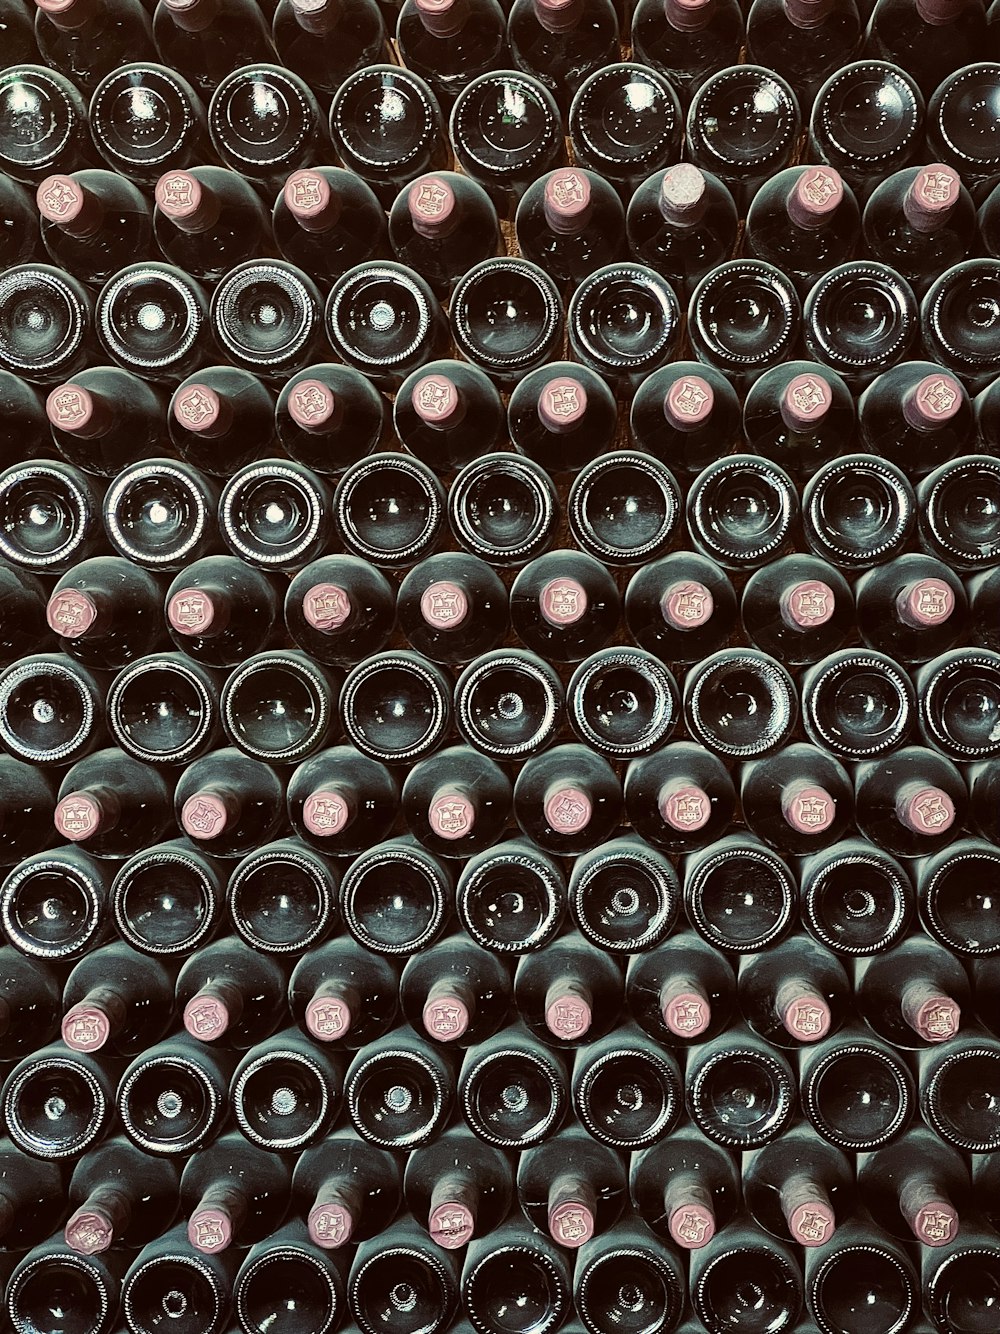 a bunch of wine bottles stacked on top of each other